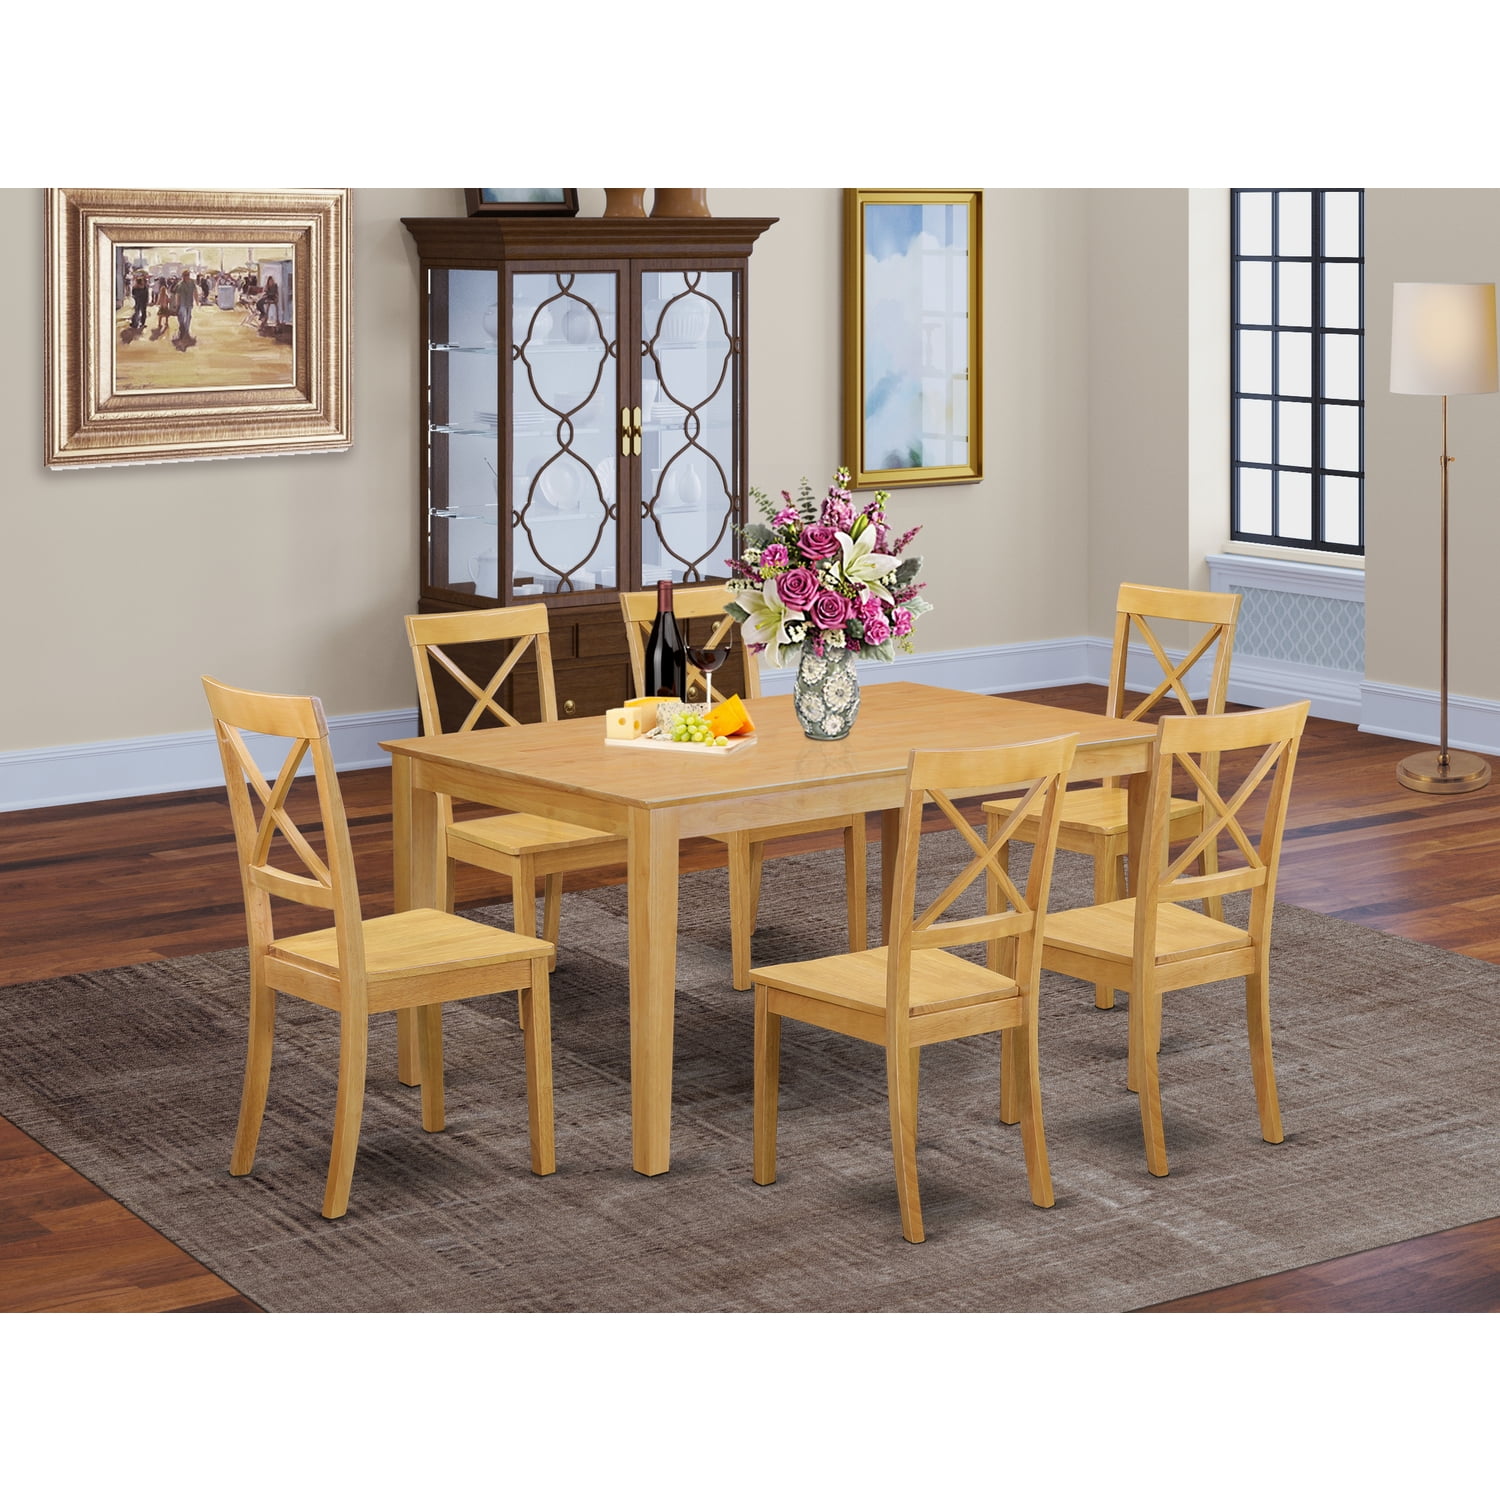 CABO7-OAK-W 7 Piece dining room Set for 6 set-Dining table and 6 Wood